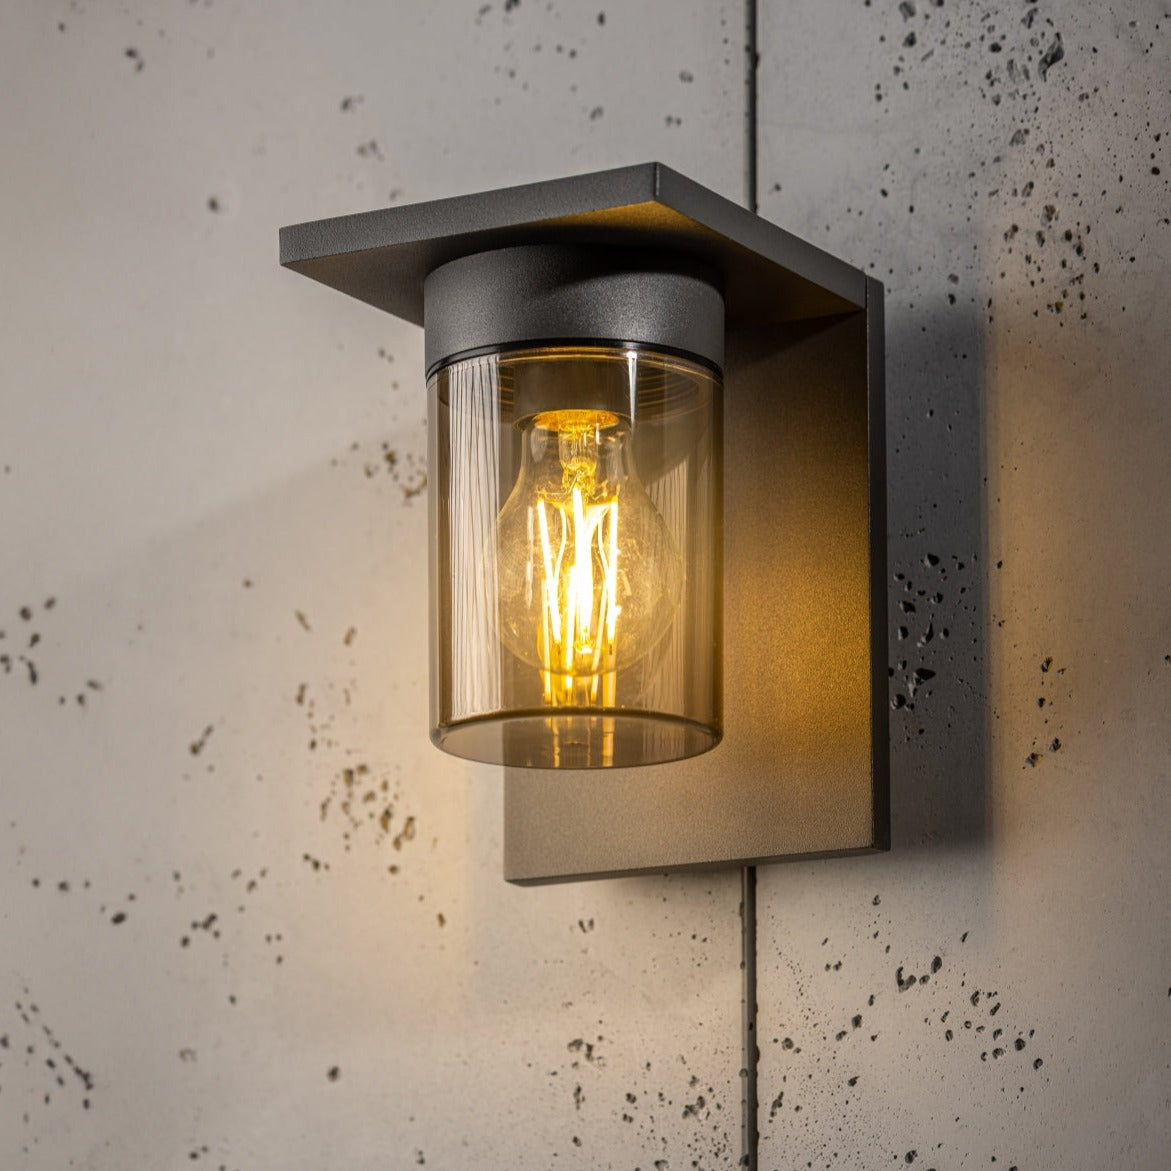 If you’re looking for a modern take on a traditional outdoor wall light, this&nbsp;anthracite wall light is perfect for adding style and protection for your home. This classic design with a contemporary twist, styled with a metal square shape and fitted with a smoked cylinder diffuser that allow the light to shine effectively